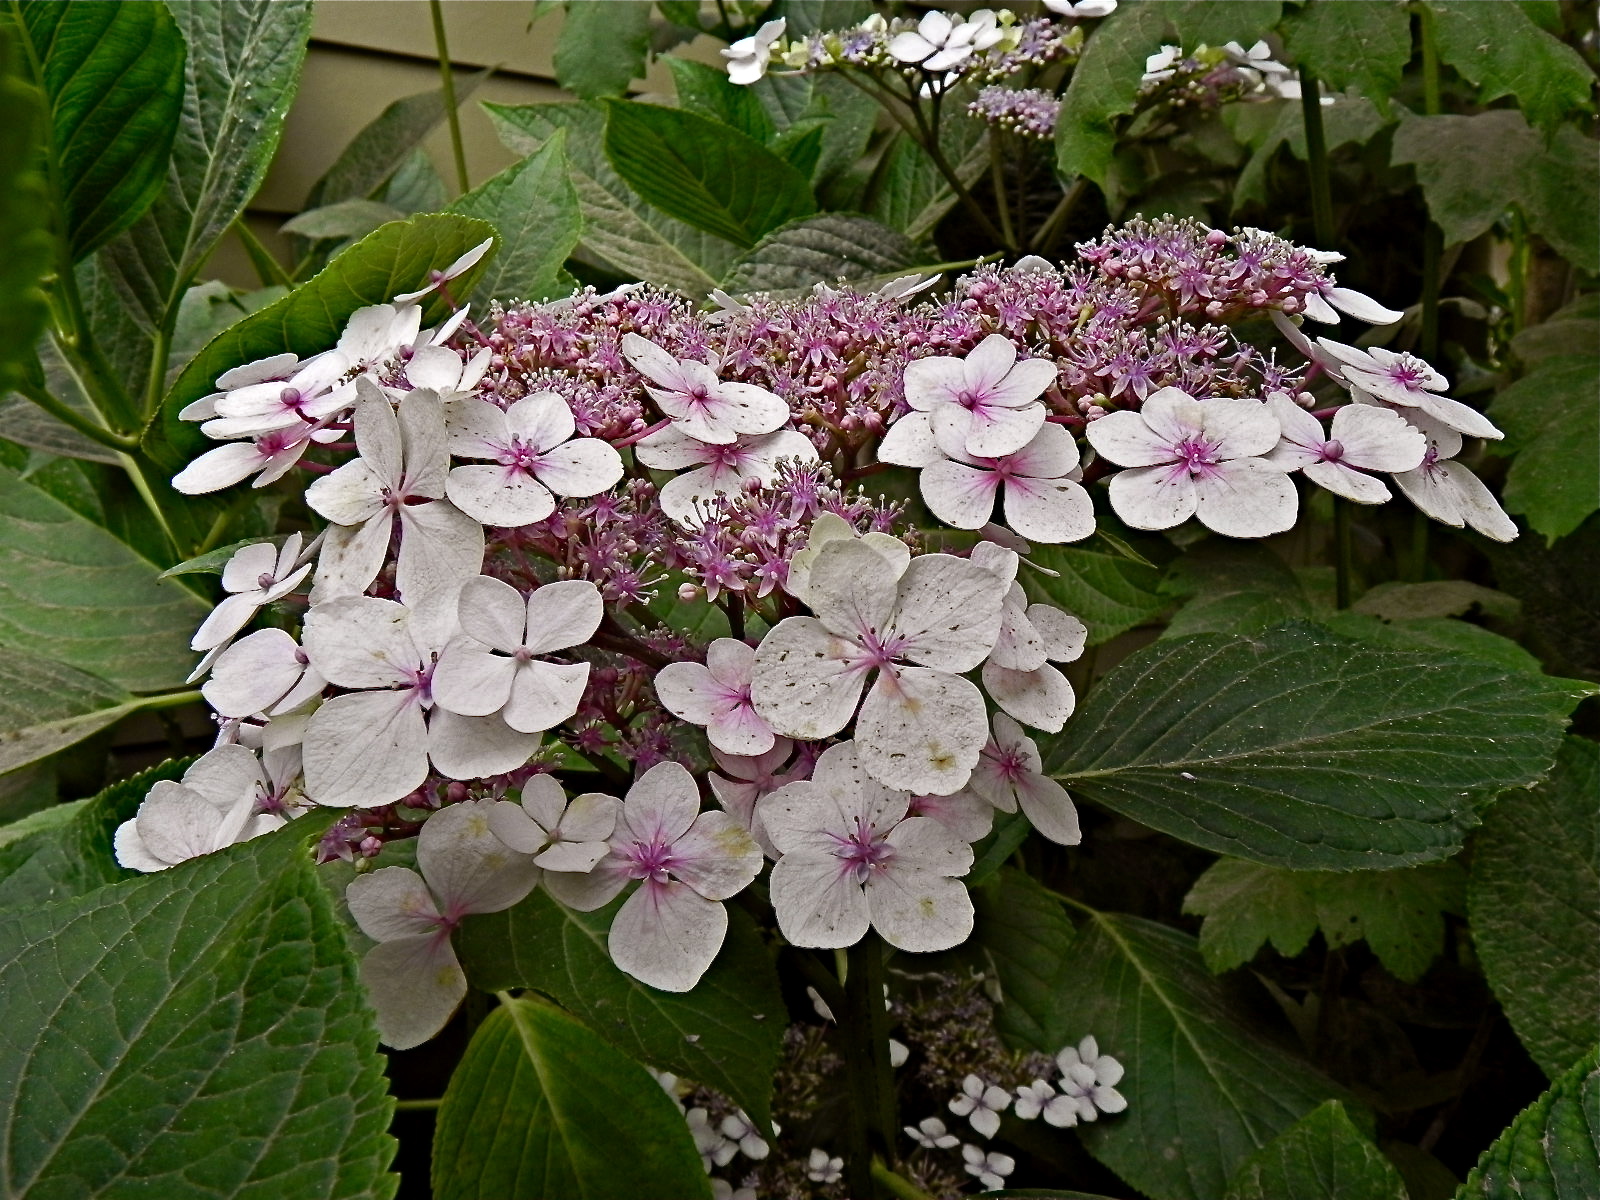 Lacecap hydrangeas from cuttings from Hearst Castle